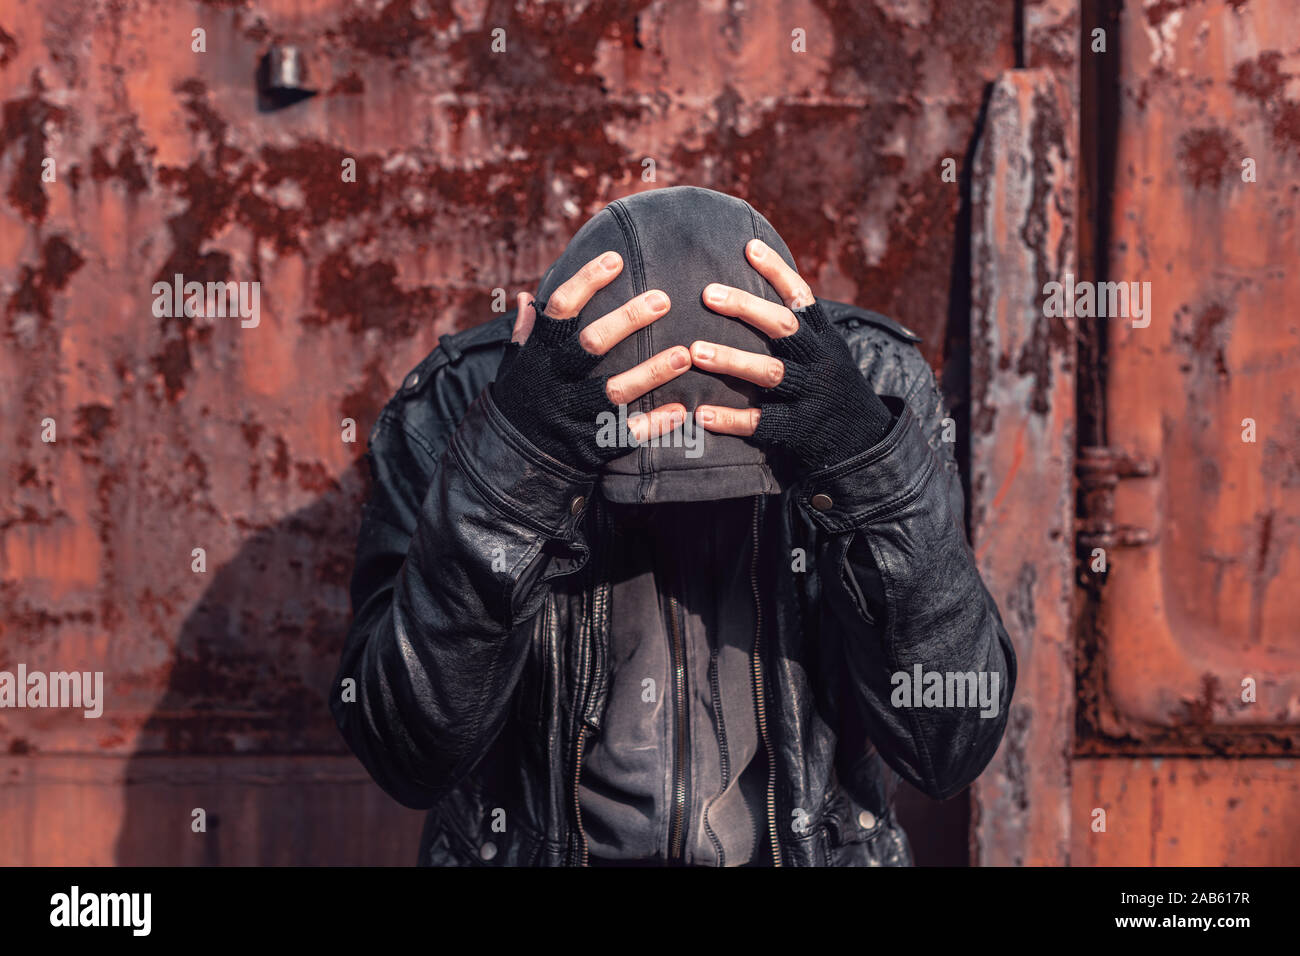 Homeless drug addict having abstinence crisis, conceptual portrait with selective focus Stock Photo